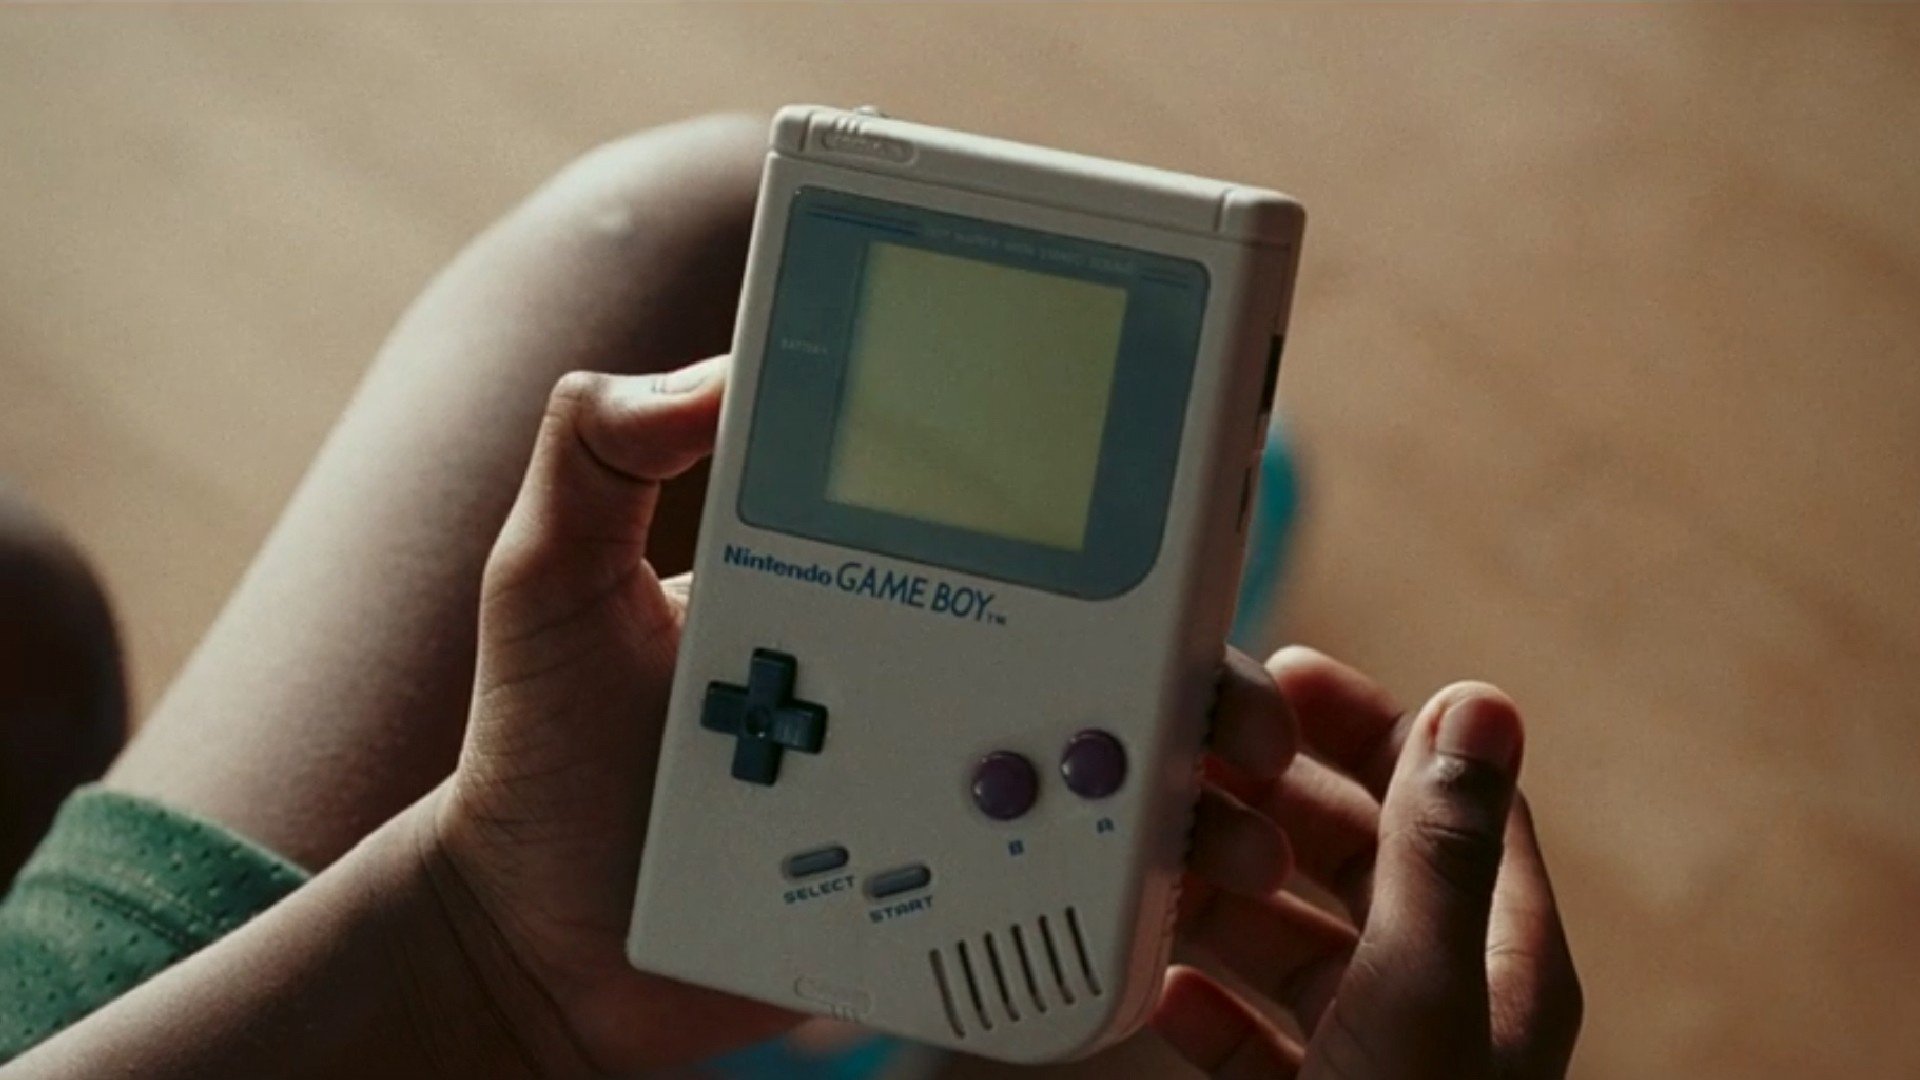 The real hero of the movie is the kid who gave an expensive (albeit second-hand) console to his friend